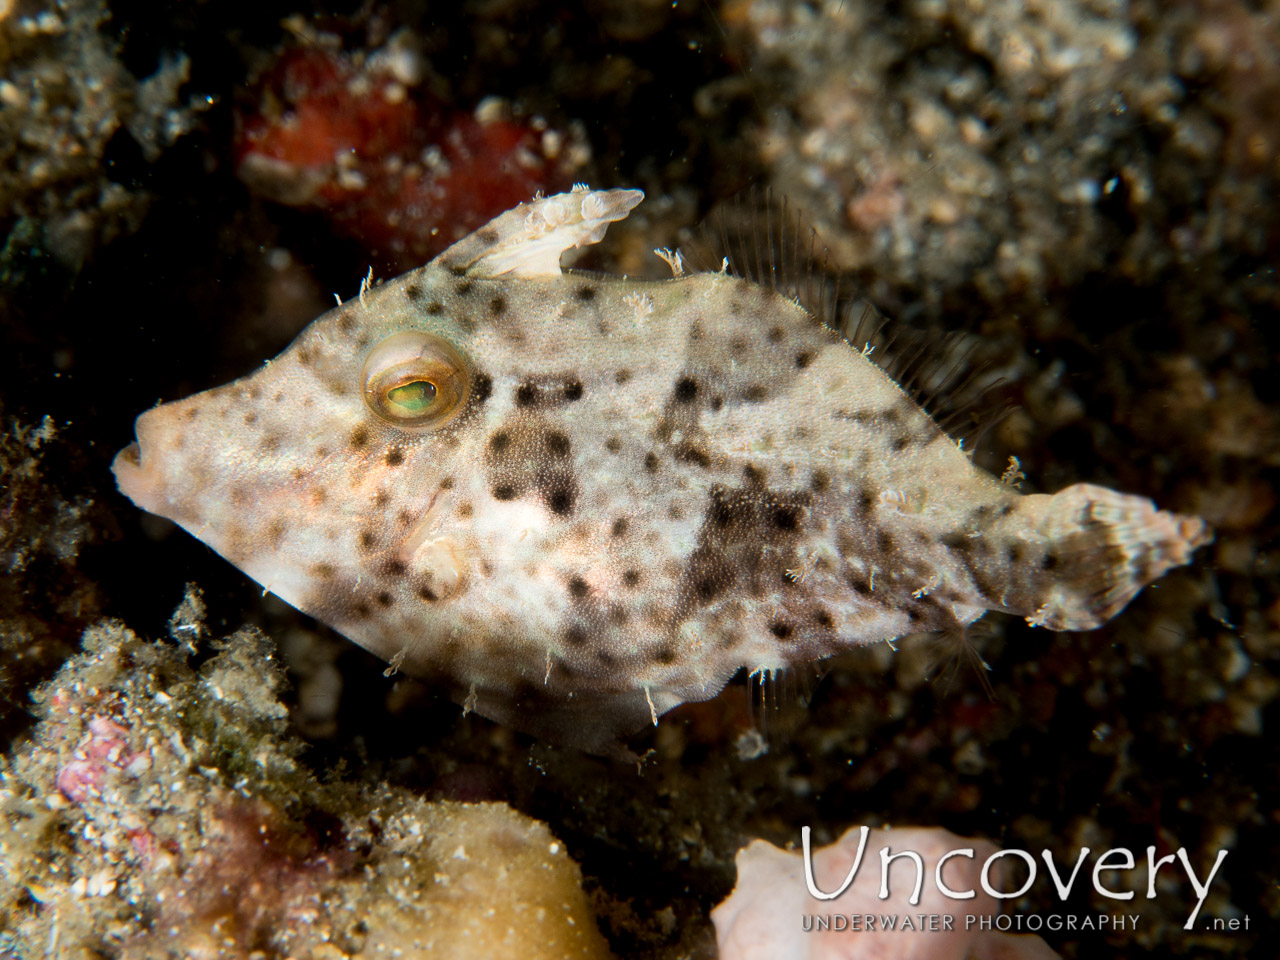 Filefish shot in Indonesia|North Sulawesi|Lembeh Strait|Critter Hunt